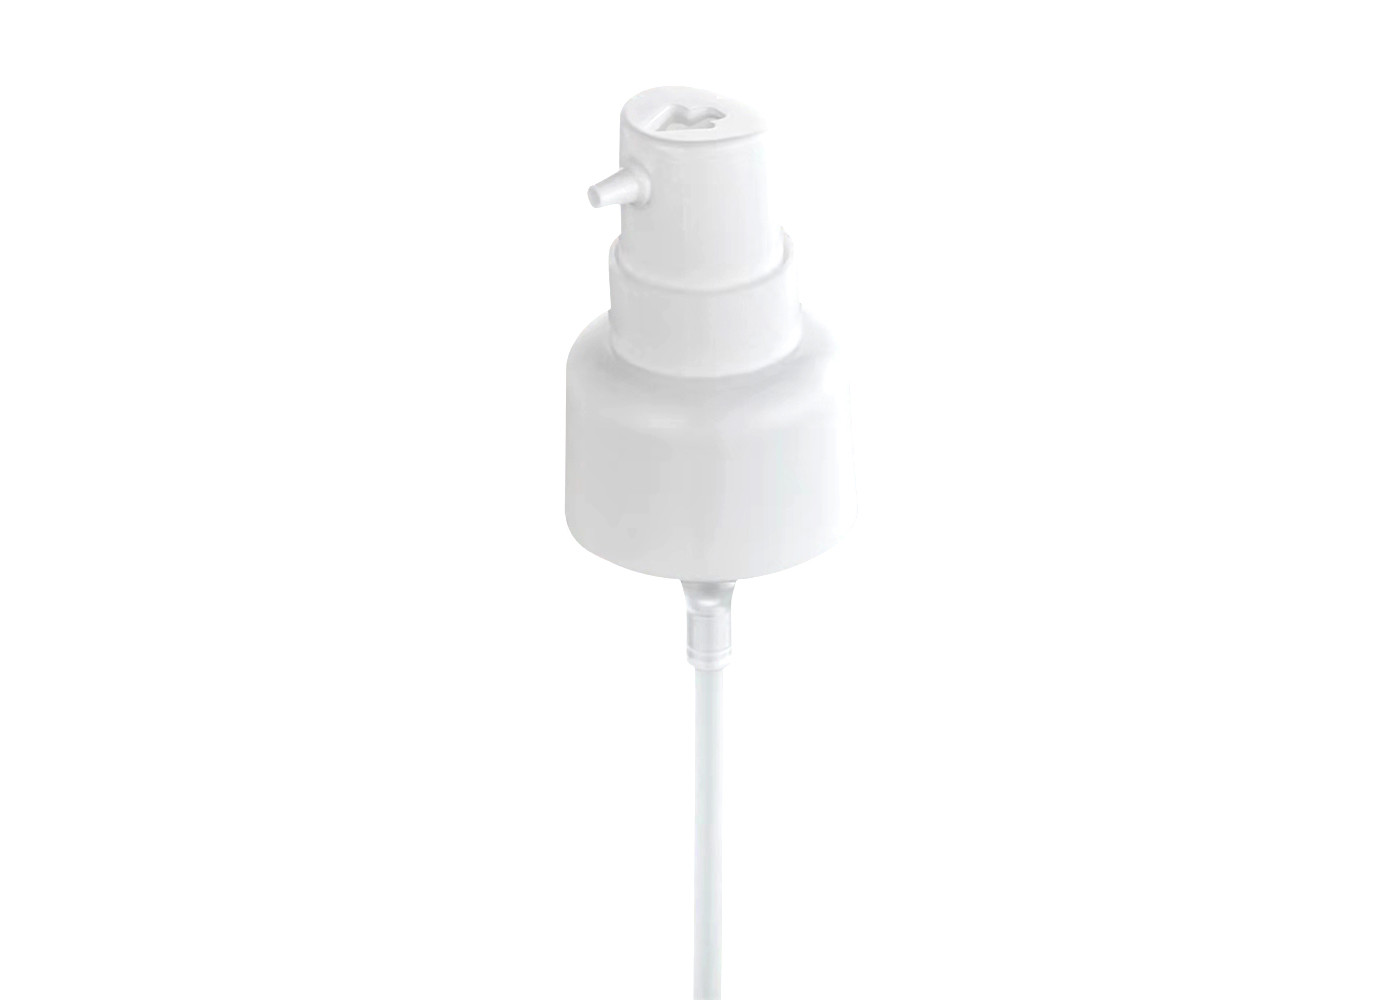  White Smooth Sided Plastic Cosmetic Treatment Pumps For Facial Care Serum Manufactures